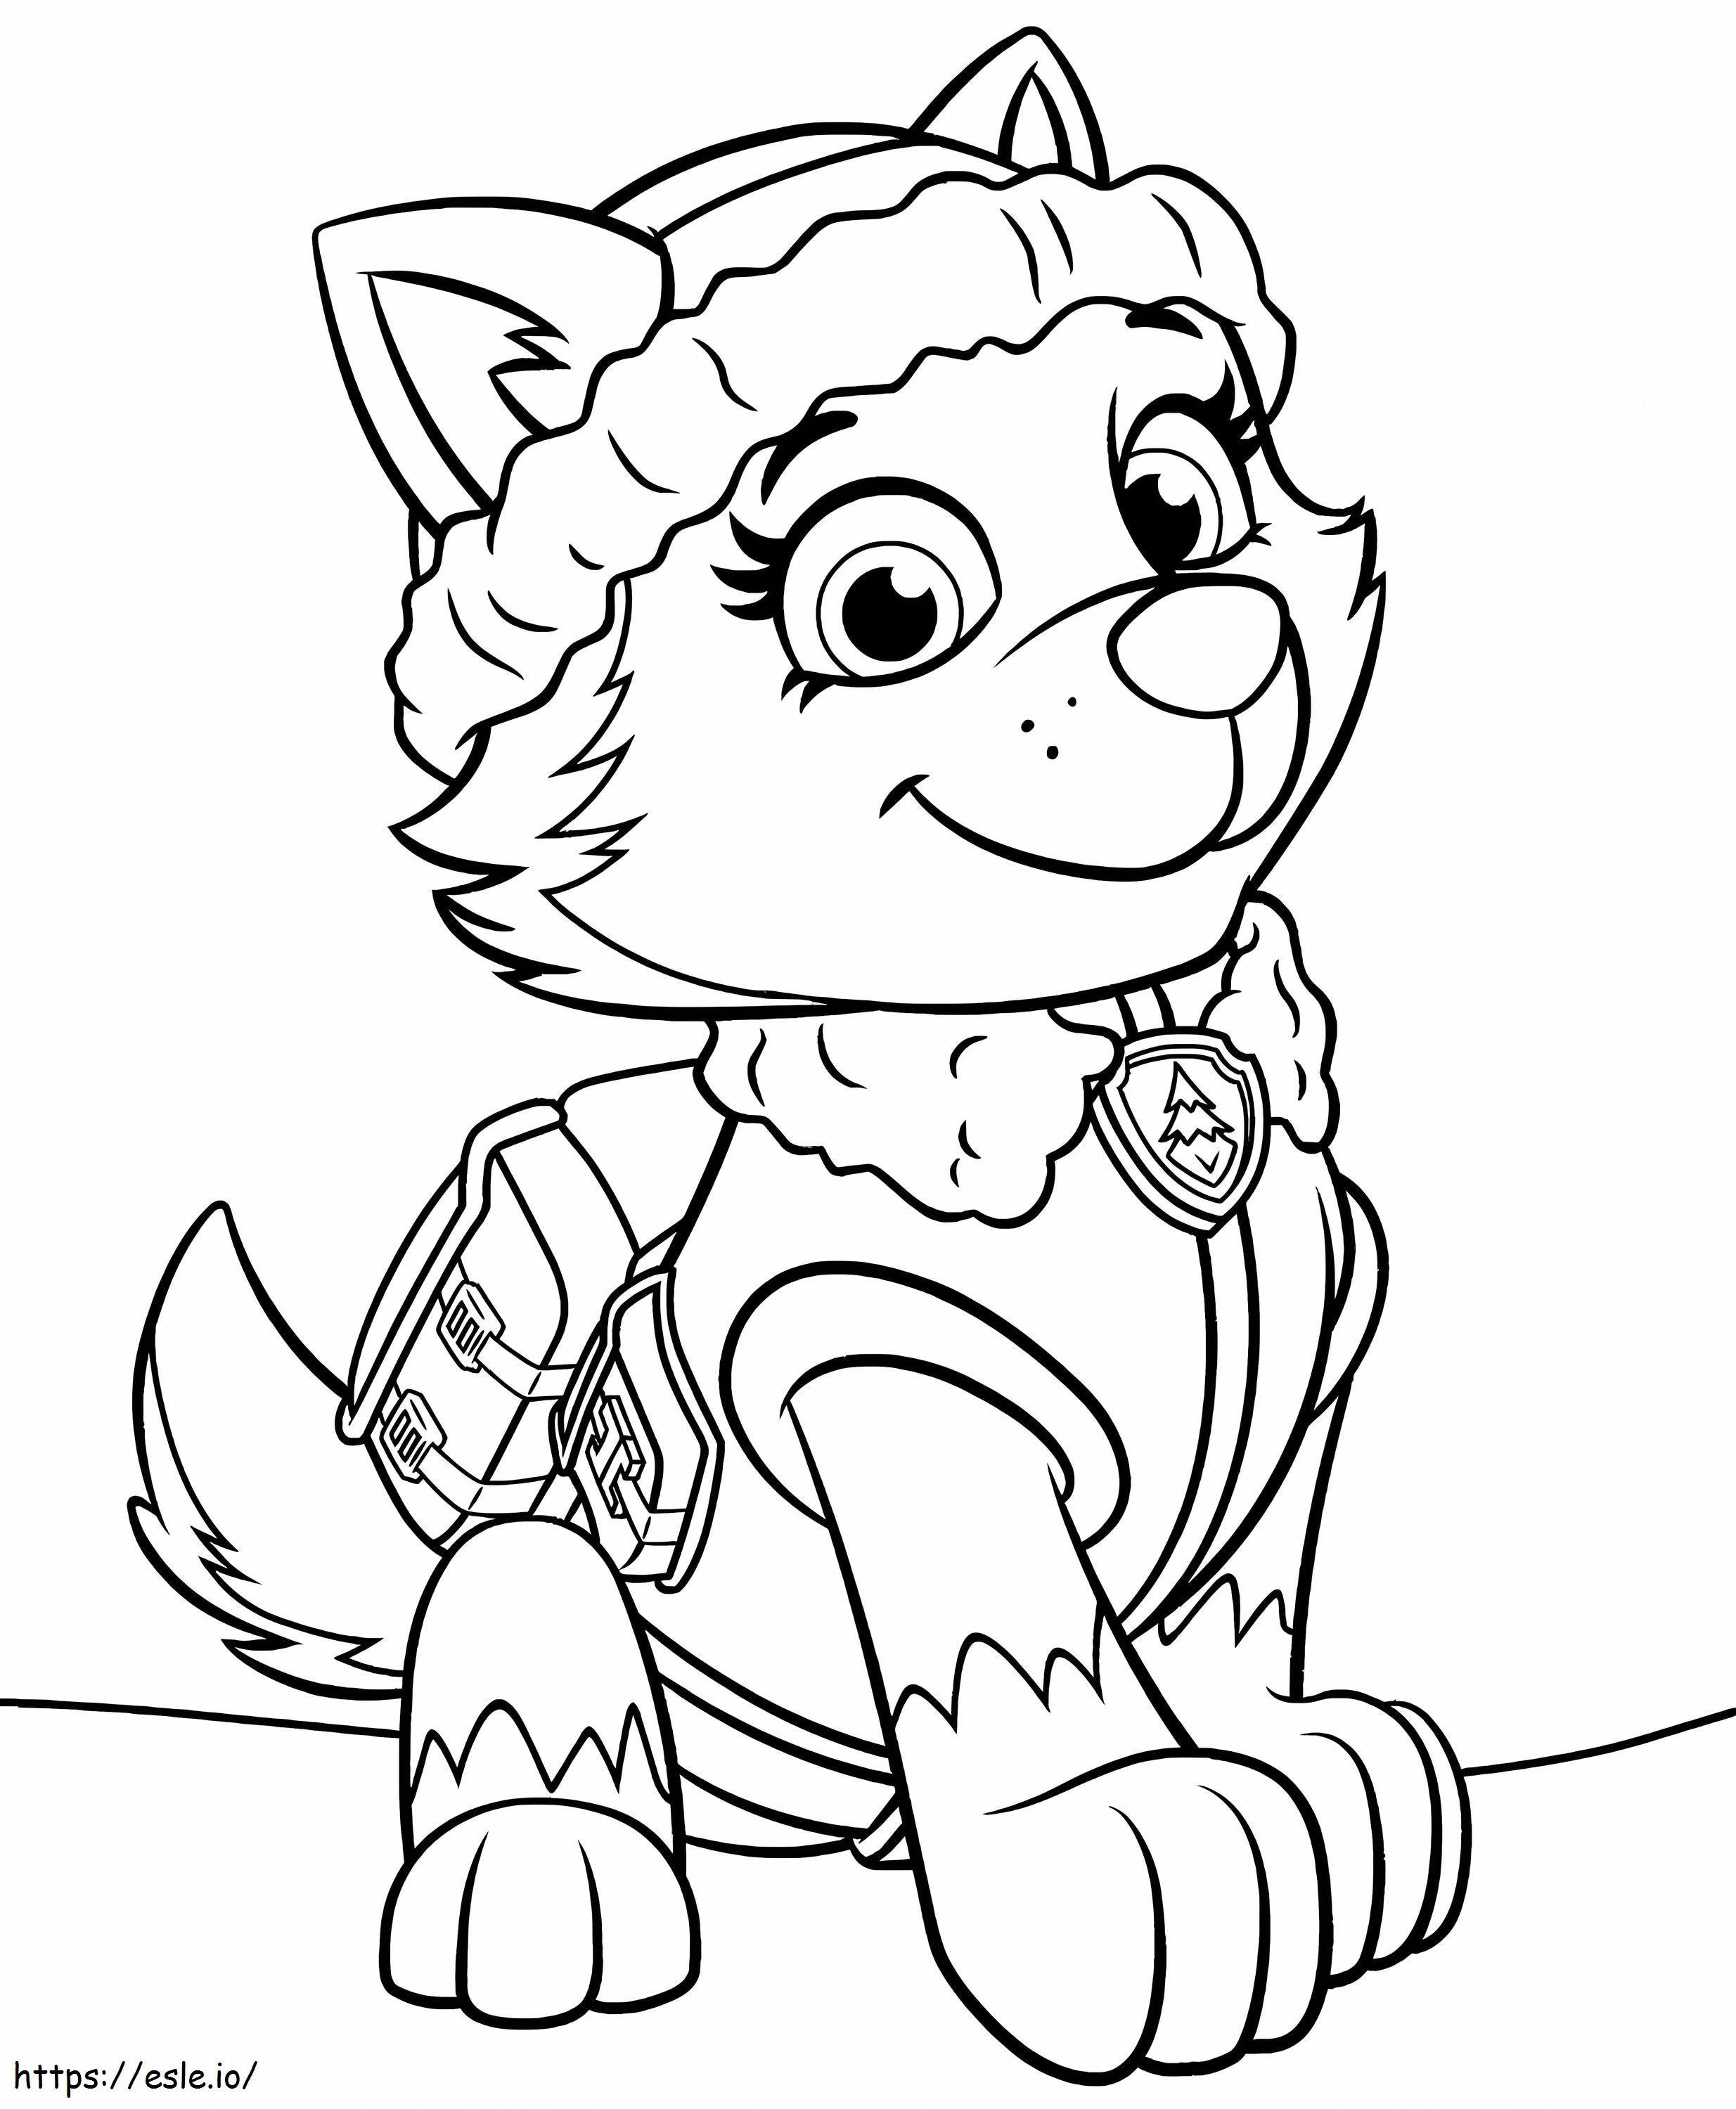 1565745973 Paw Patrol Everest A4 coloring page